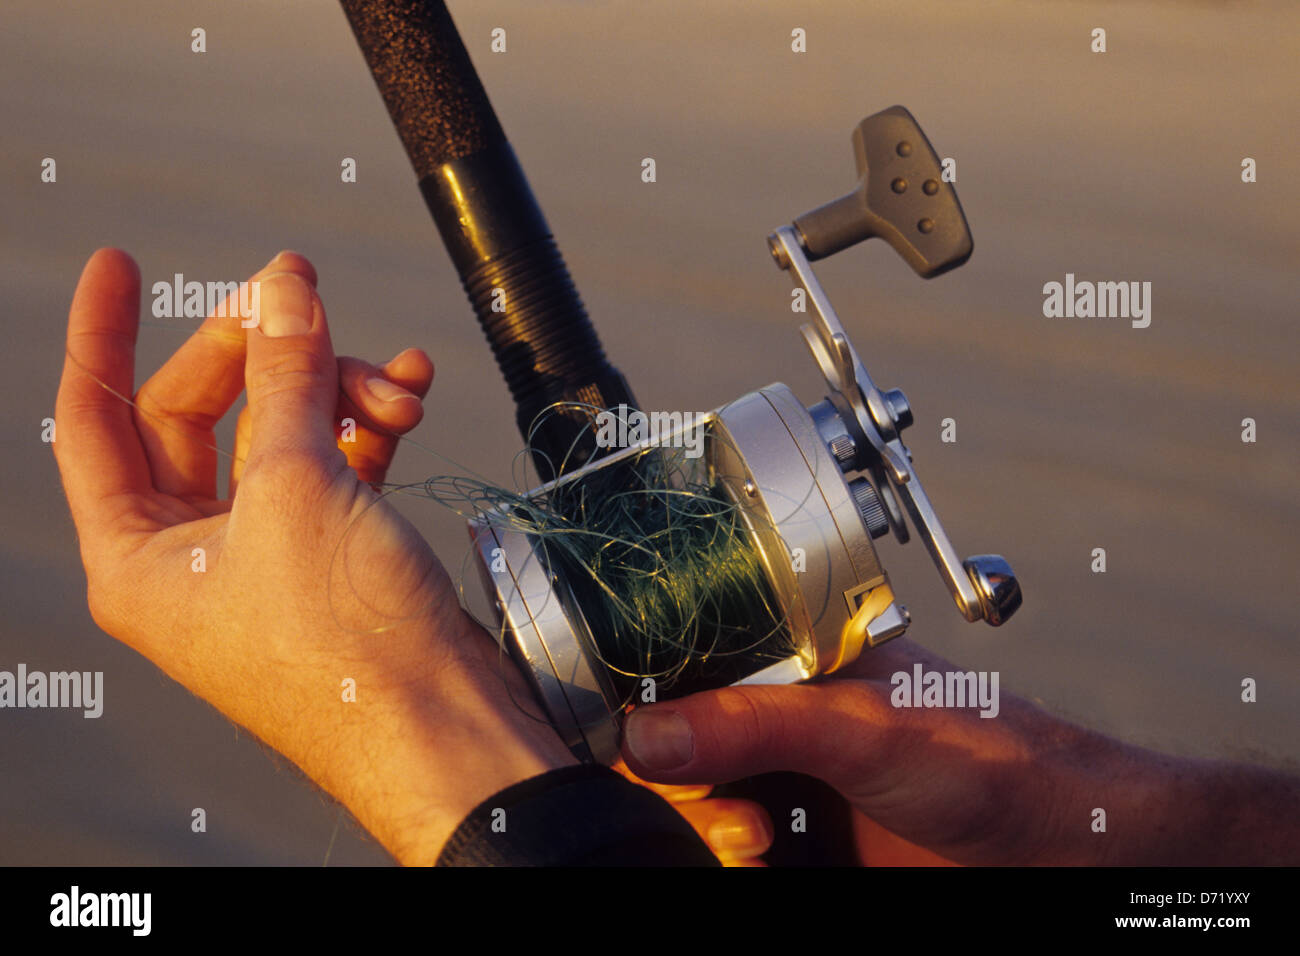 https://c8.alamy.com/comp/D71YXY/a-spool-of-tangled-line-on-a-reel-used-for-surf-fishing-on-the-beach-D71YXY.jpg